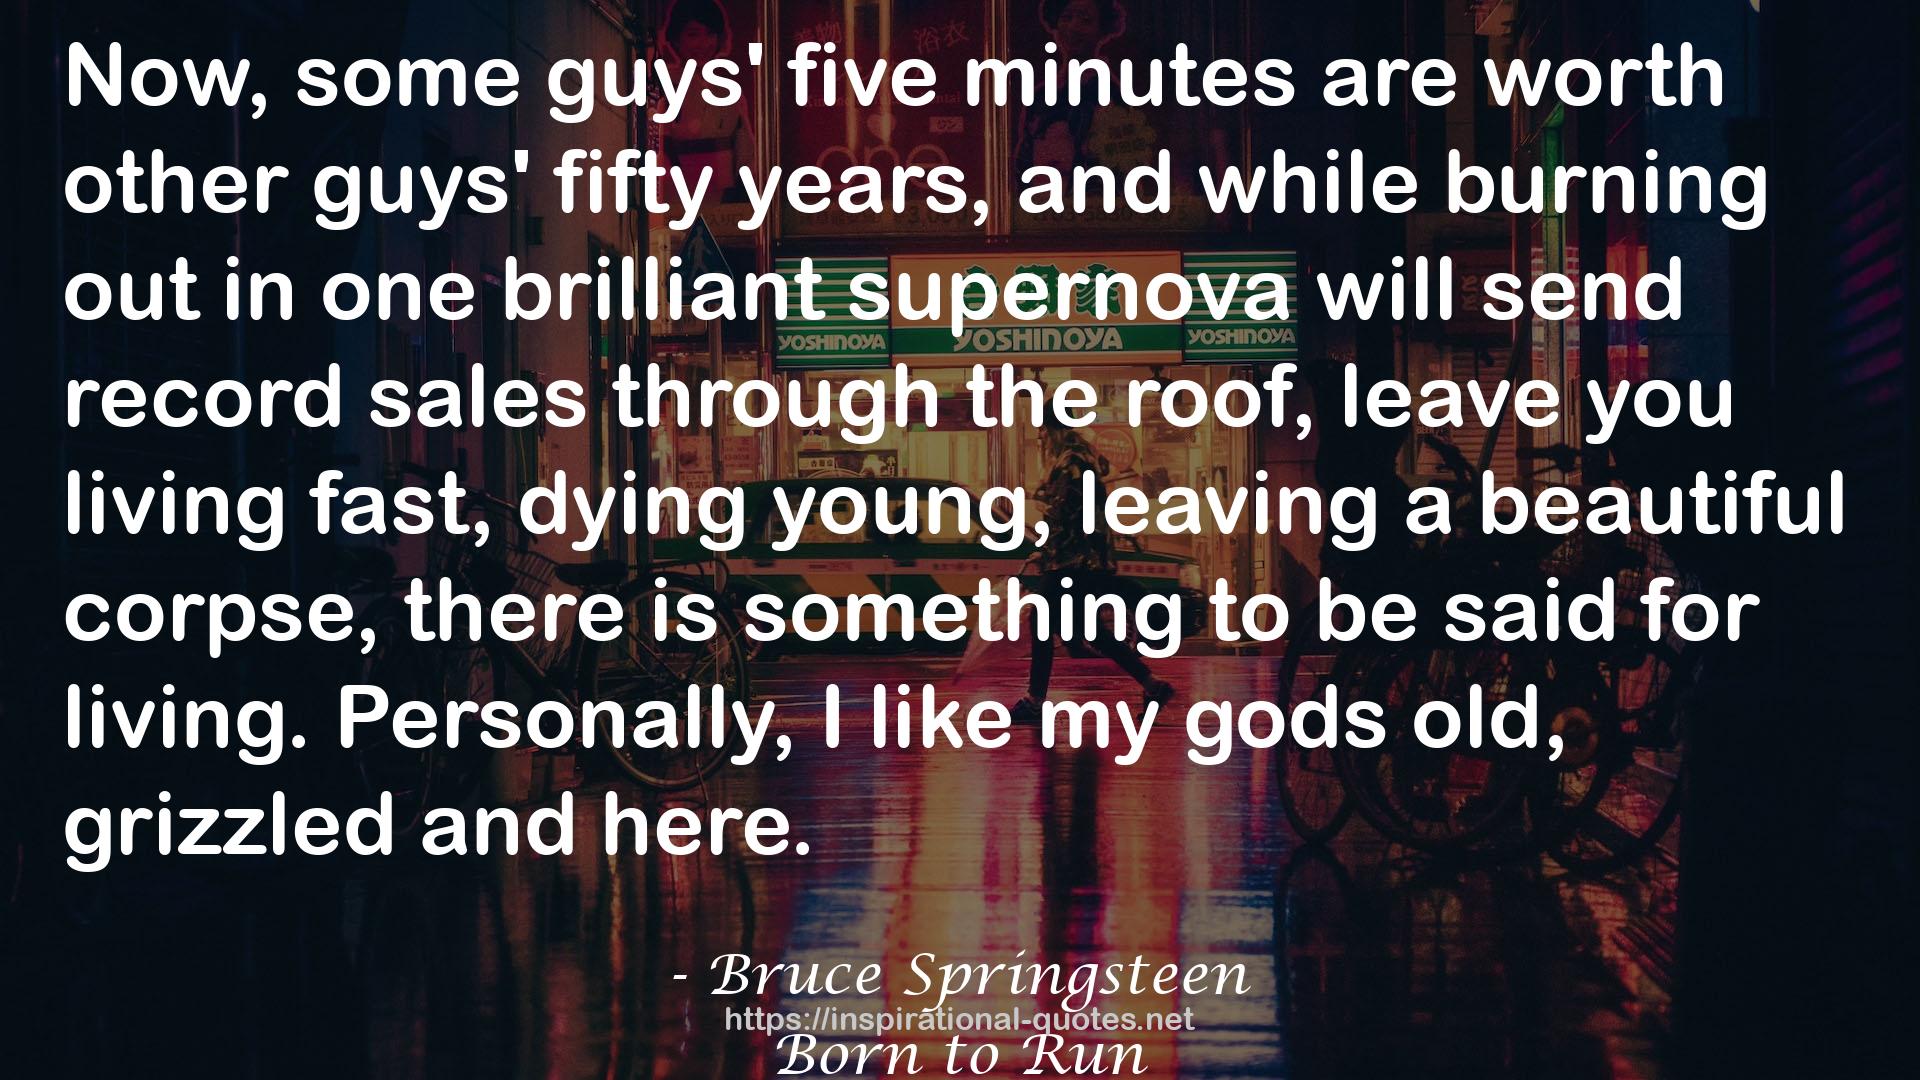 some guys' five minutes  QUOTES